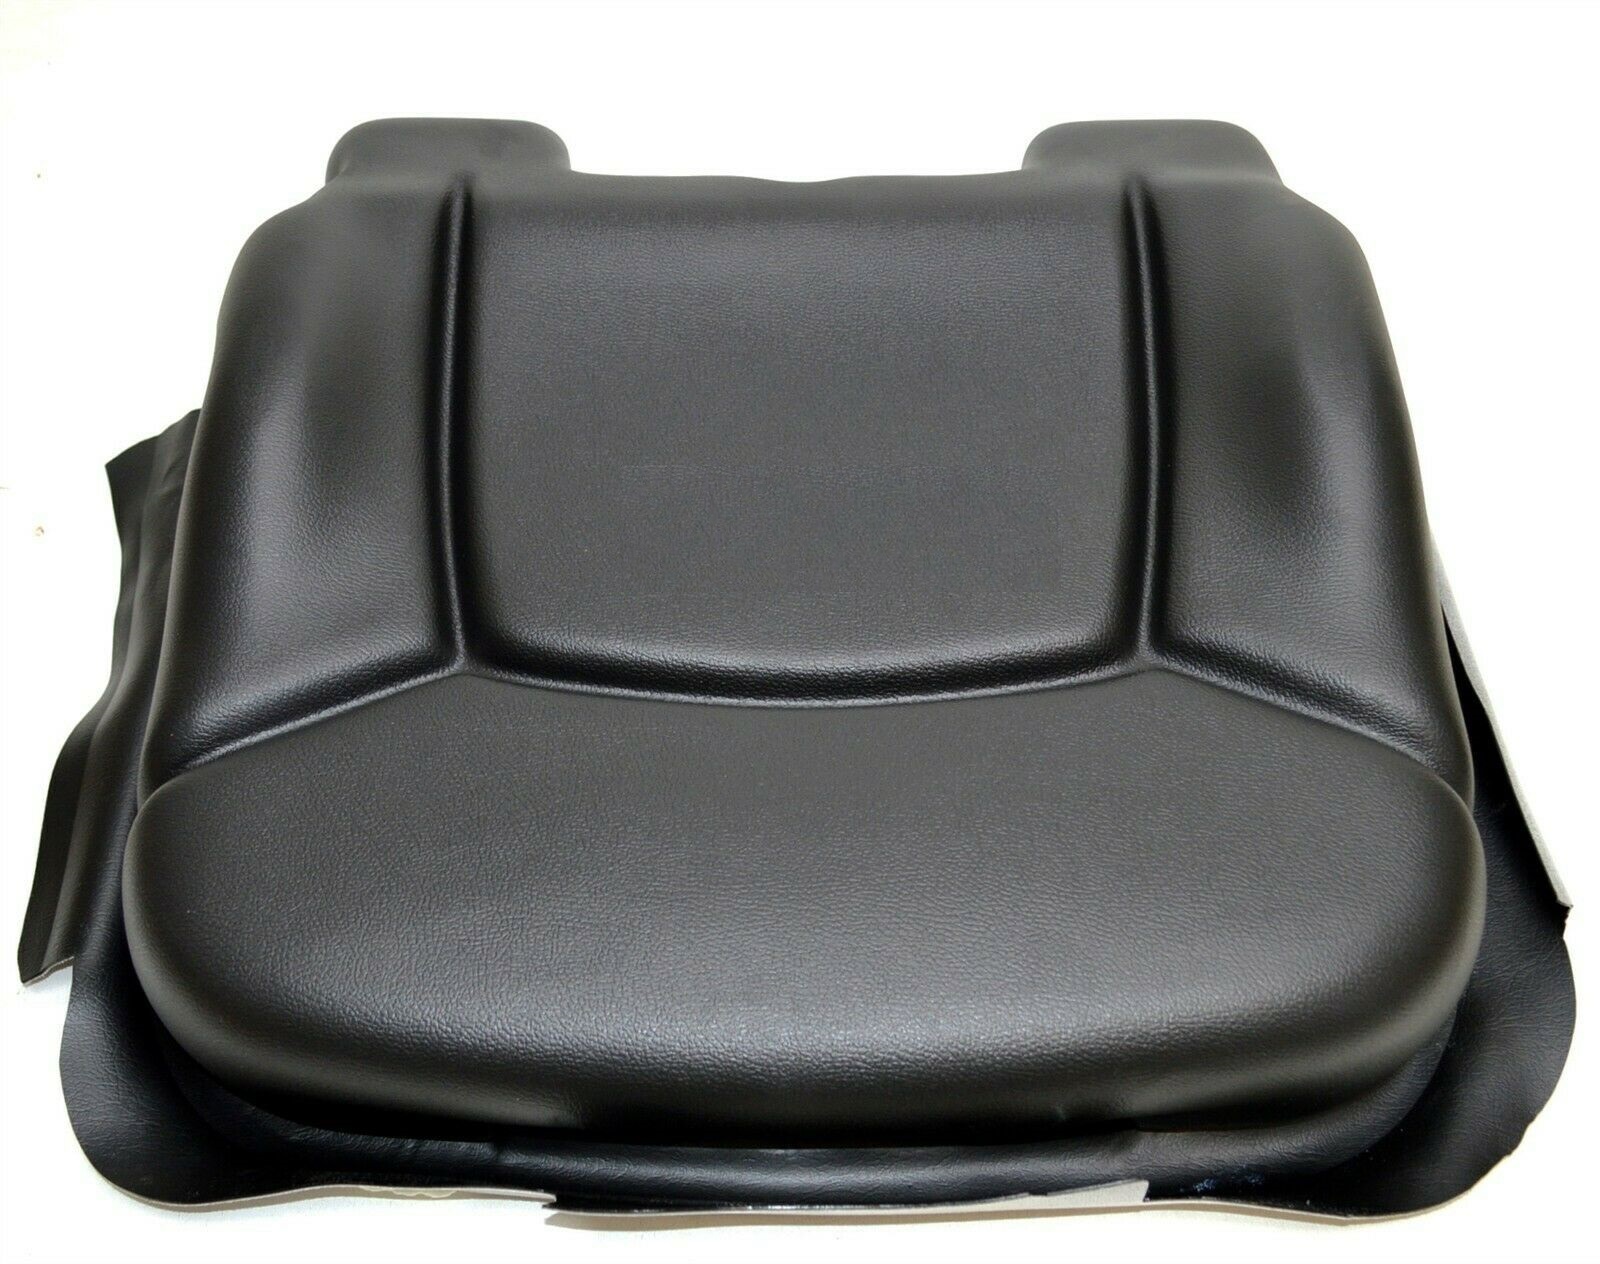 A new aftermarket replacement cushion - seat bottom for Toyota lift truck 53711U210071